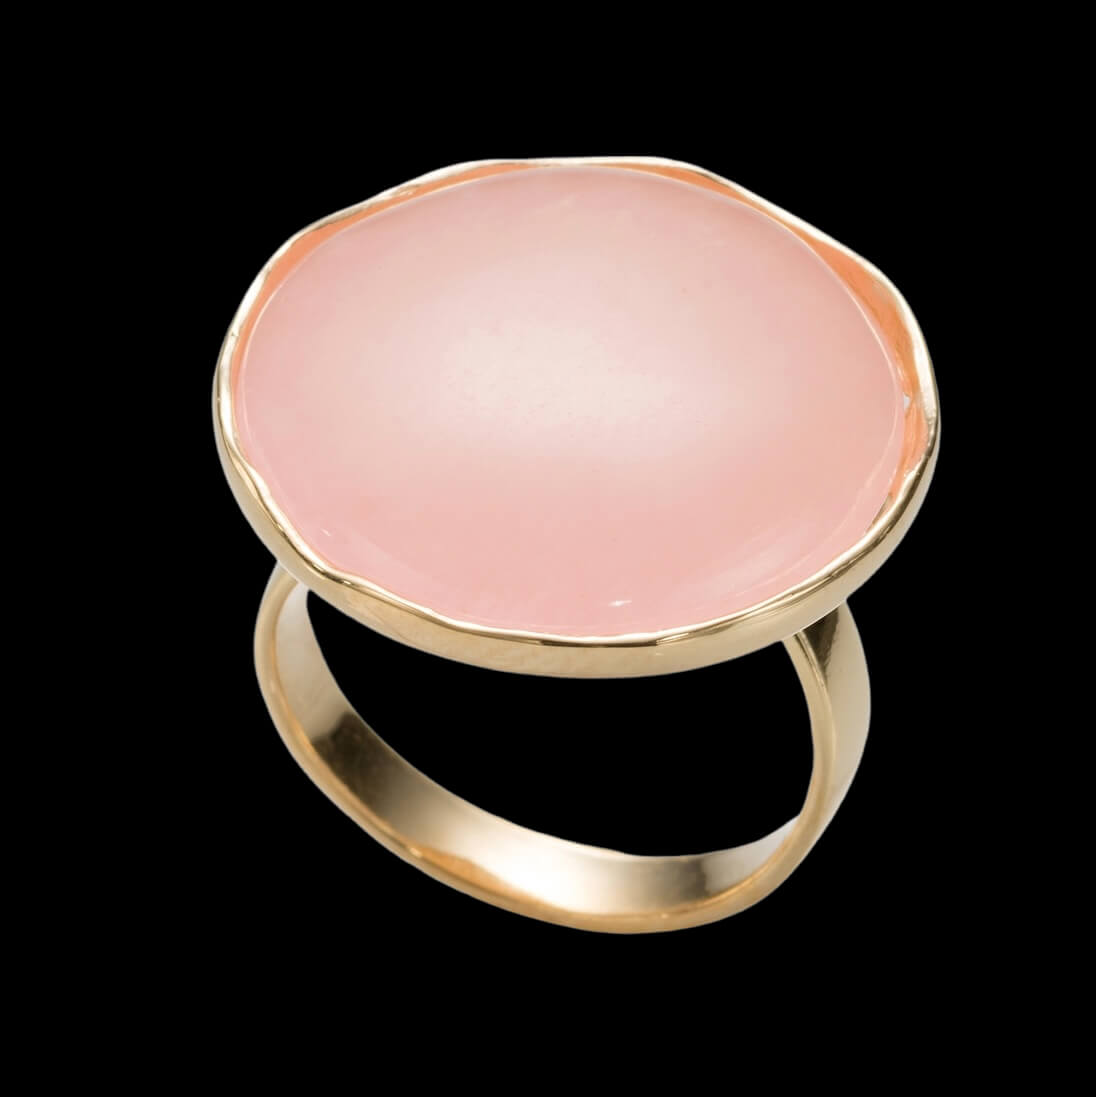 Gold plated ring with a large coral-colored quartz stone